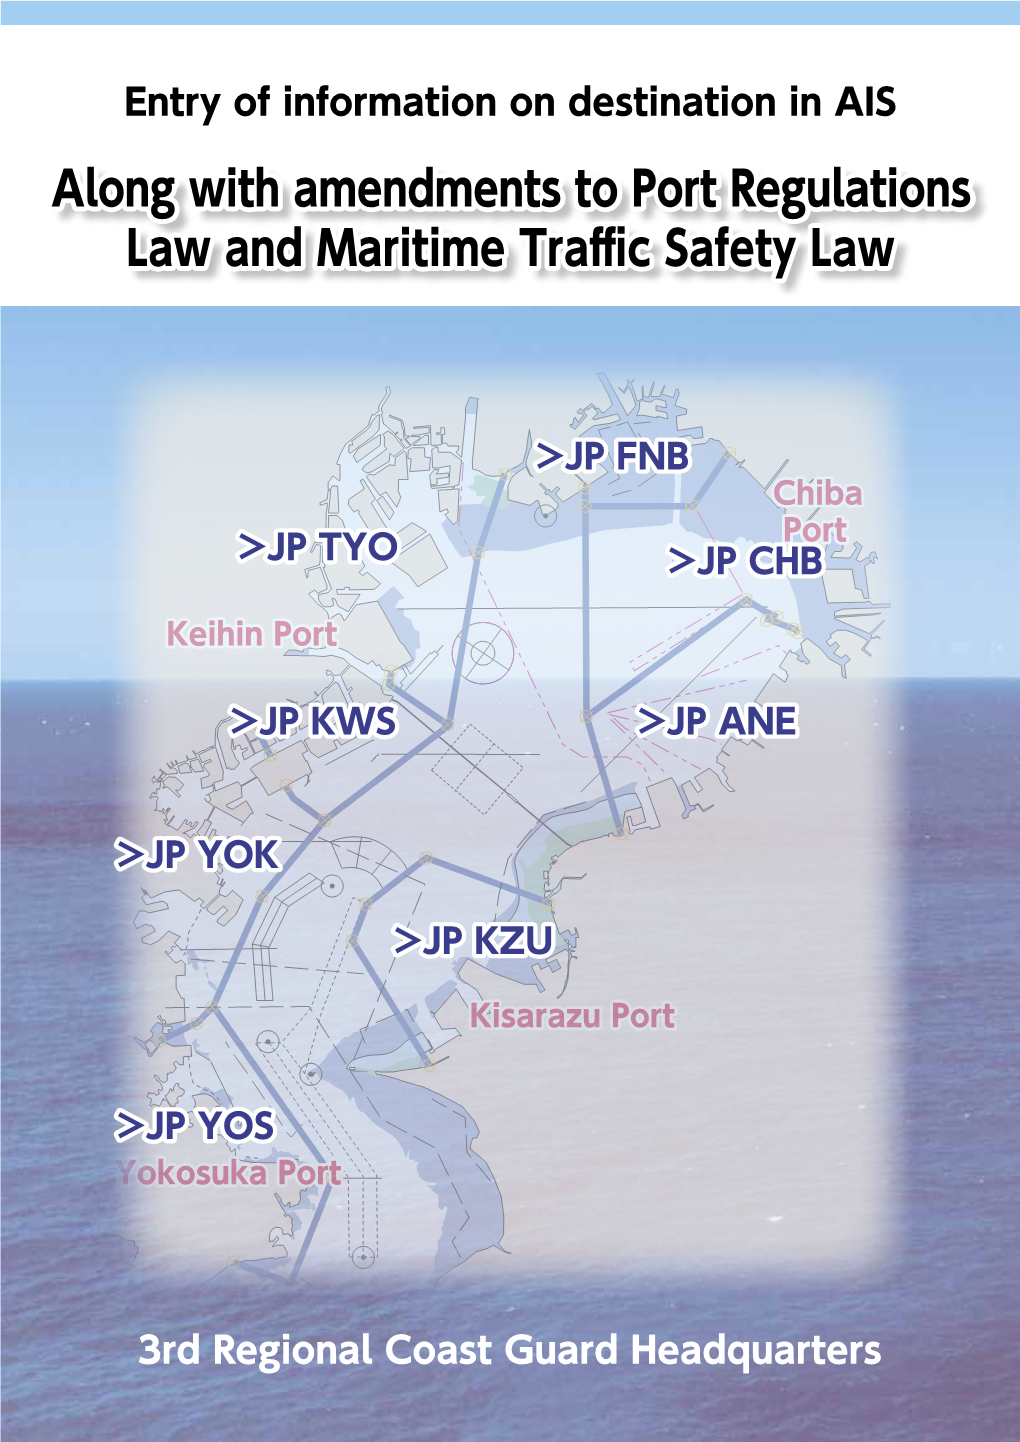 Along with Amendments to Port Regulations Law and Maritime Traffic Safety Law